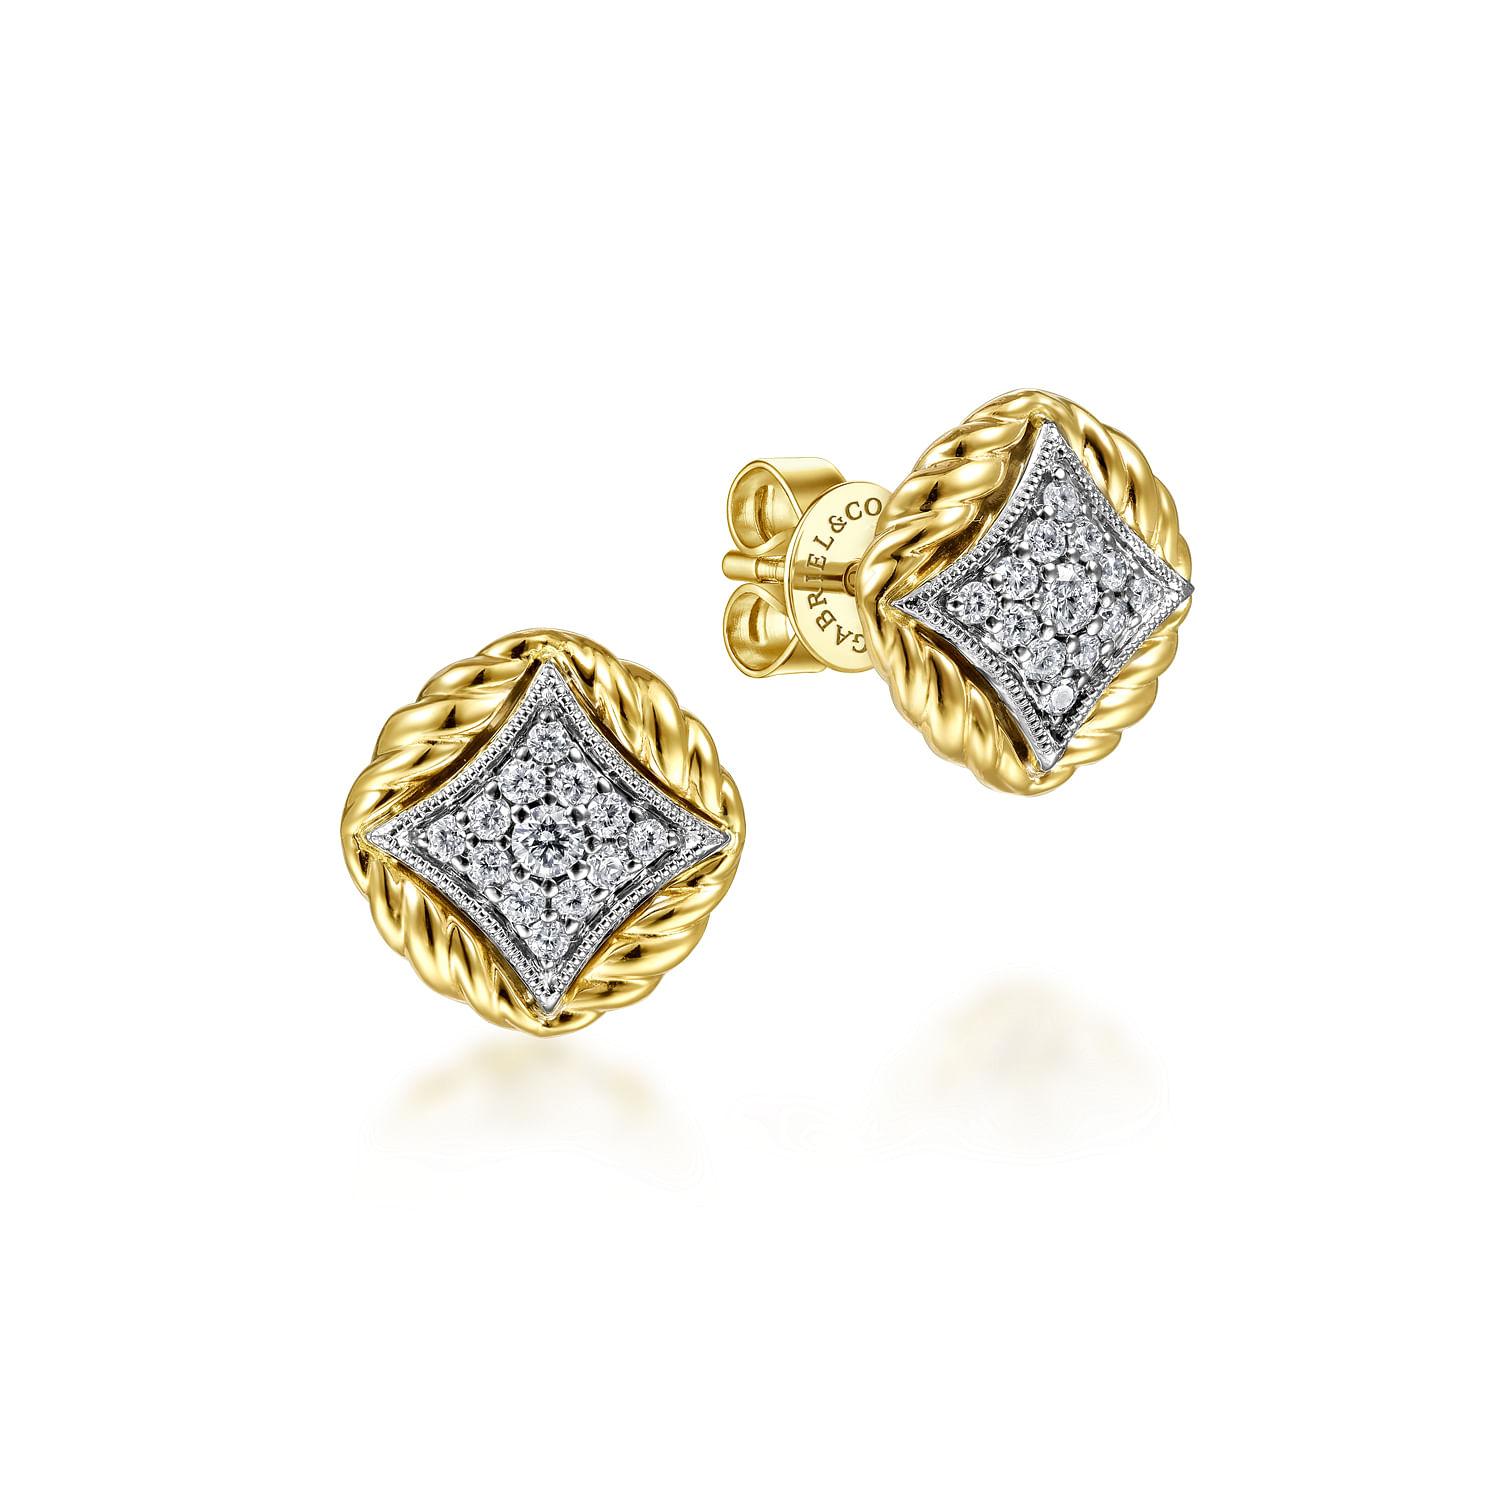 14K Yellow-White Gold Pavé Diamond Stud Earrings with Twisted Rope